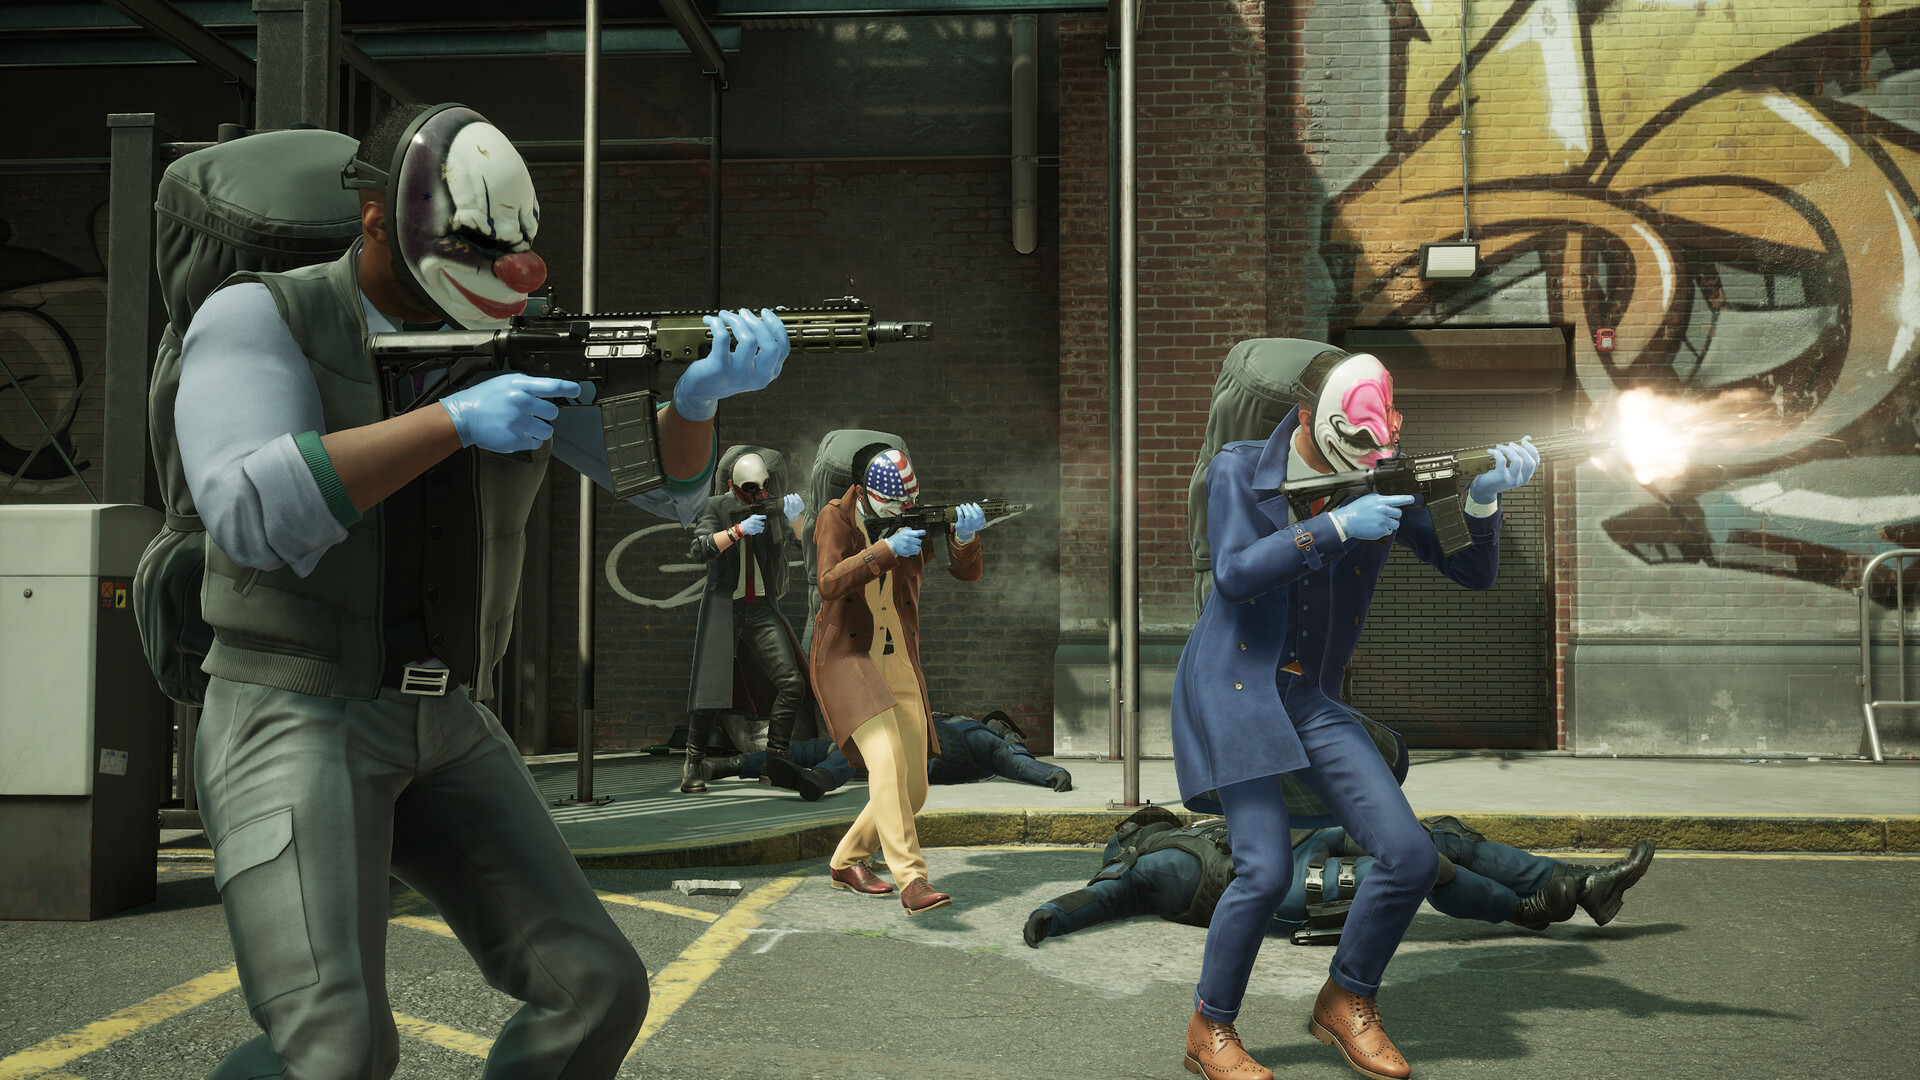 Payday 3 dev hints dropping controversial online requirement amid server  issues - Dexerto